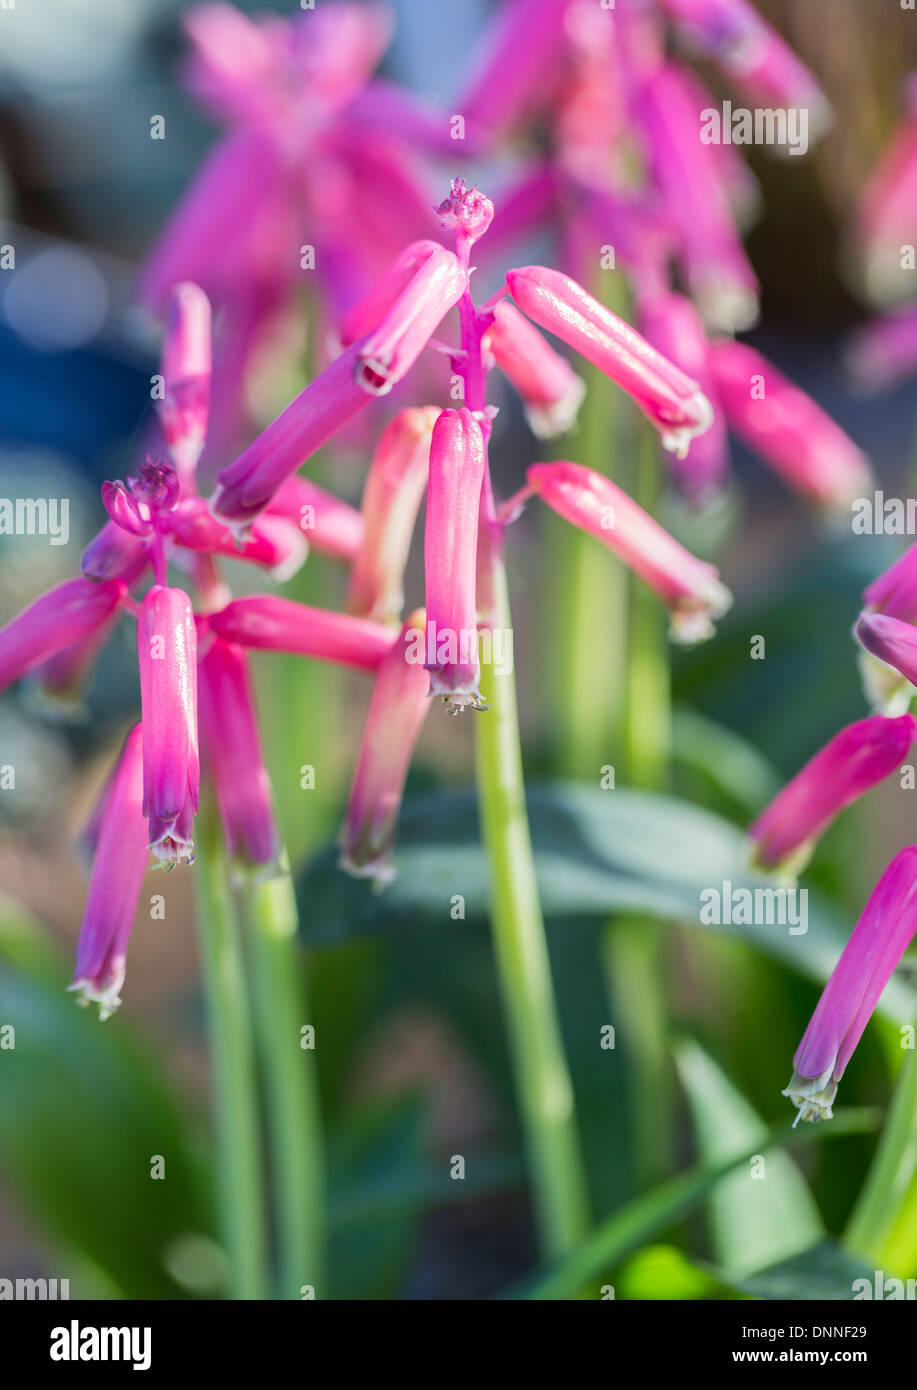 Lachenalia bulbifera, a purple to pink bulbous plant with tubular flowers originating from the Western Cape of South Africa Stock Photo